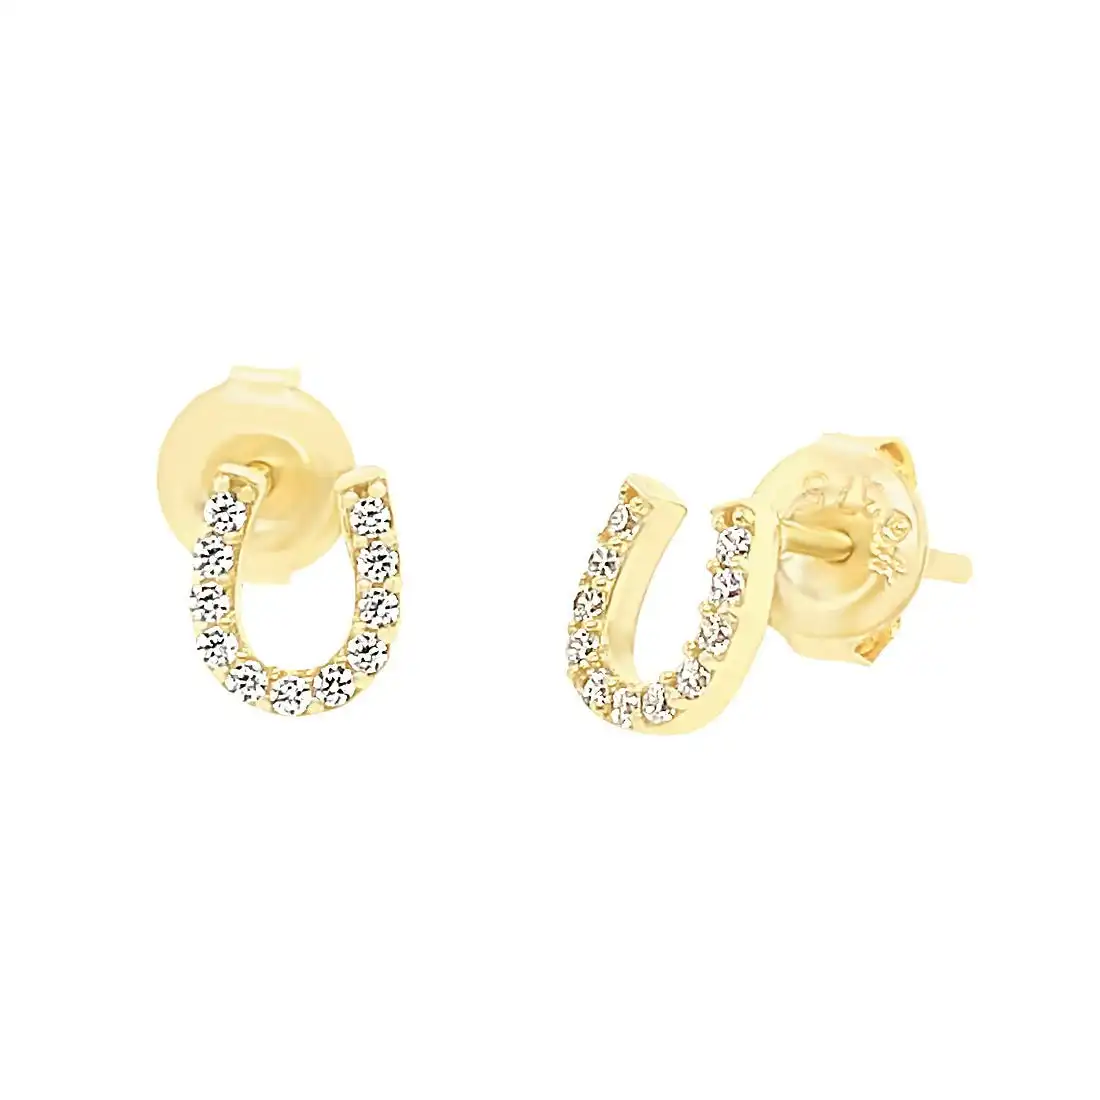 9ct Yellow Gold Horse Shoe Stud Earrings with Cubic Zirconia